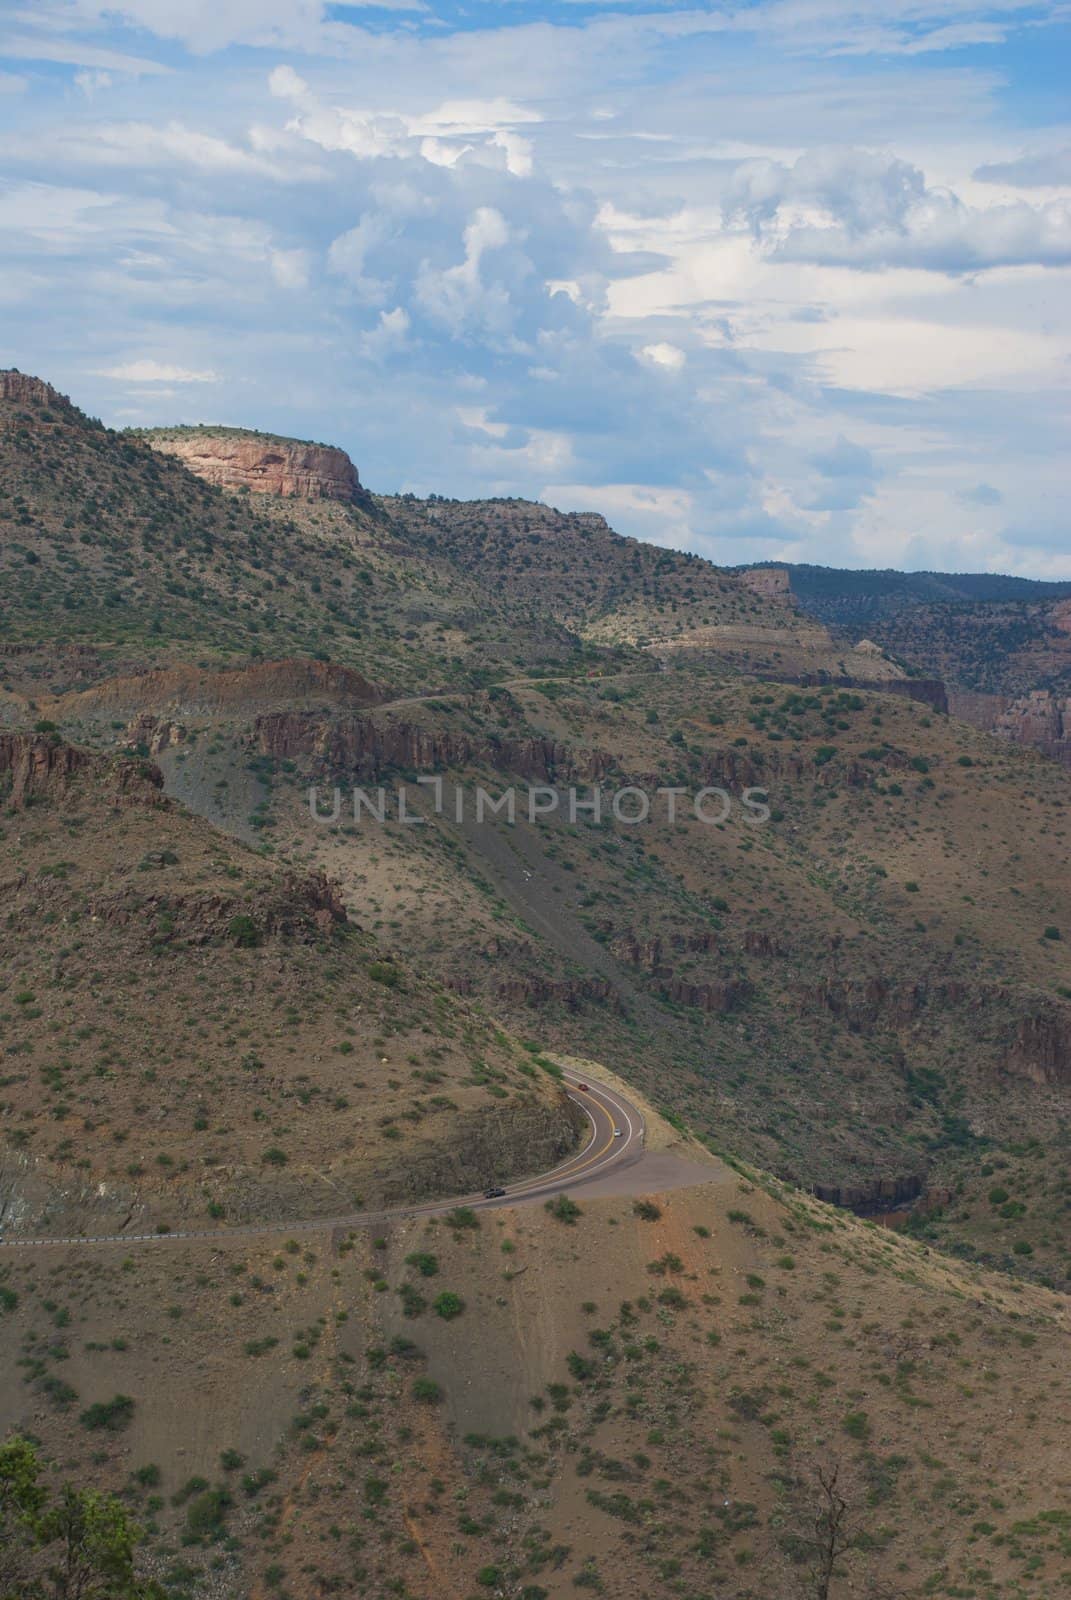 Huge desert cliffs loom over a winding highway road with swirling white clouds and a hint of blue sky